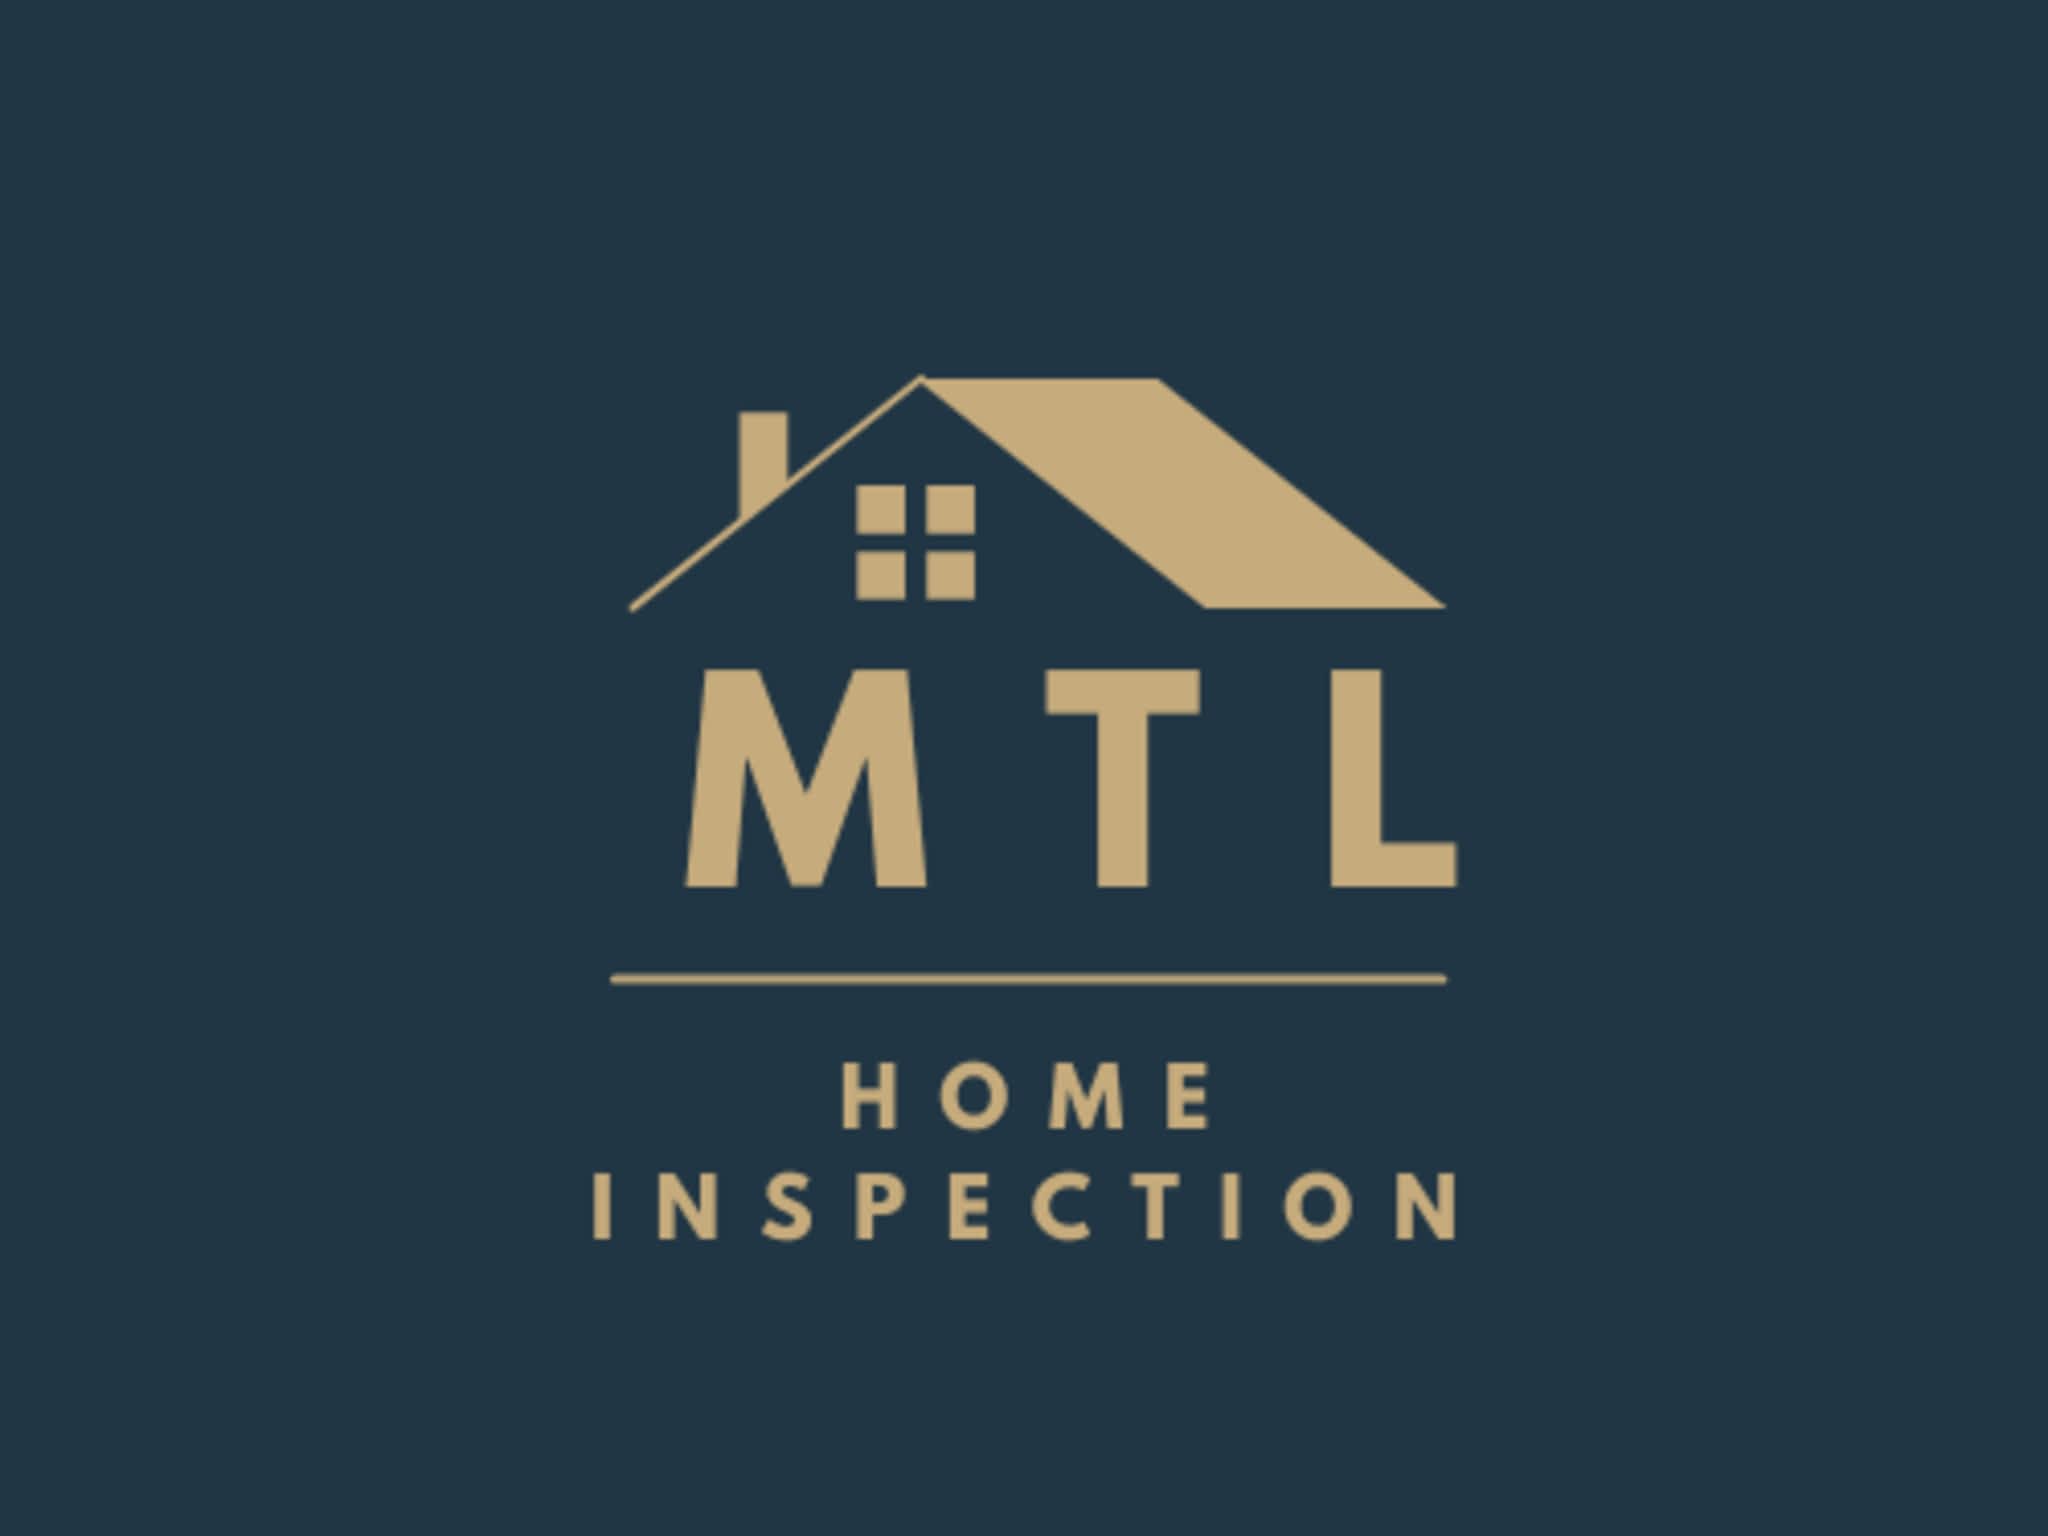 photo MTL home inspection: Inspection Maison Montreal